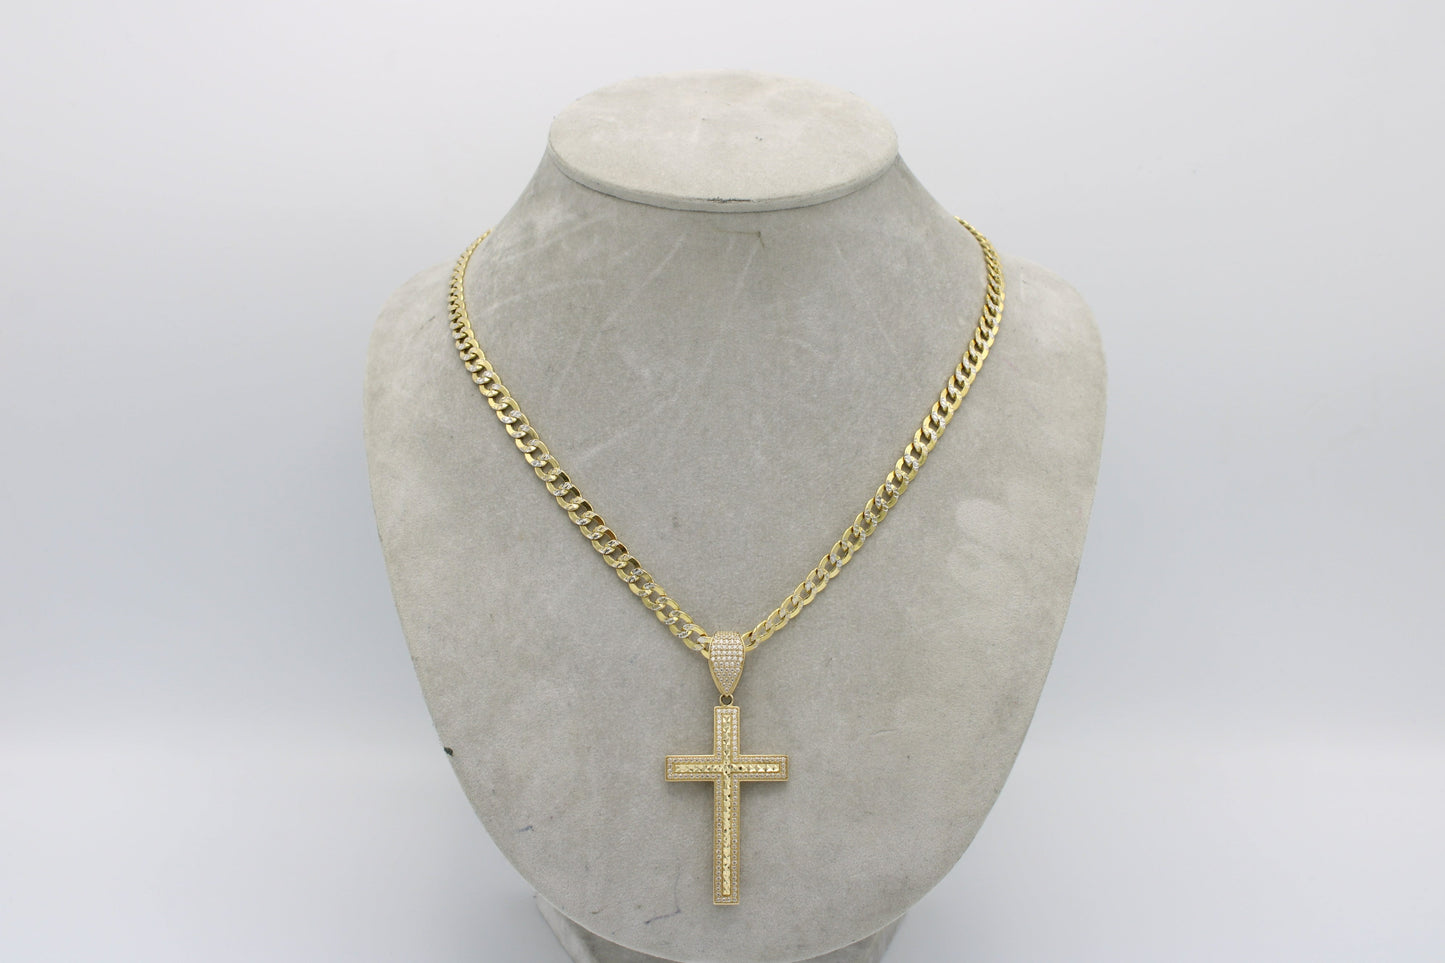 14K Cross Pendant Cz Stones With Semi-Solid Flat Cuban Chain Two Tones Yellow Gold